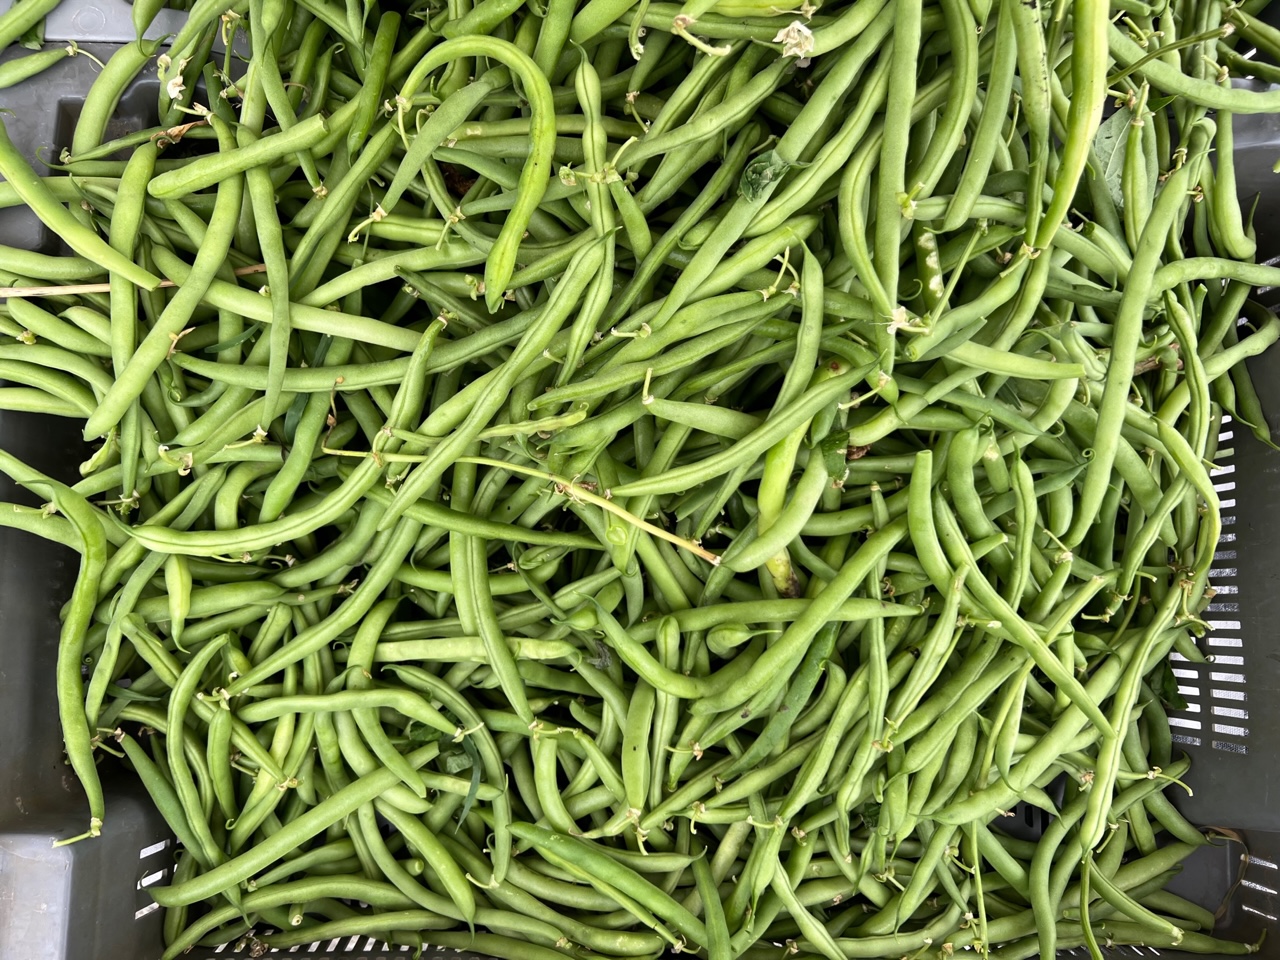 In a gray tub, there are a lot of green beans at the market. Photo by Alyssa Buckley.